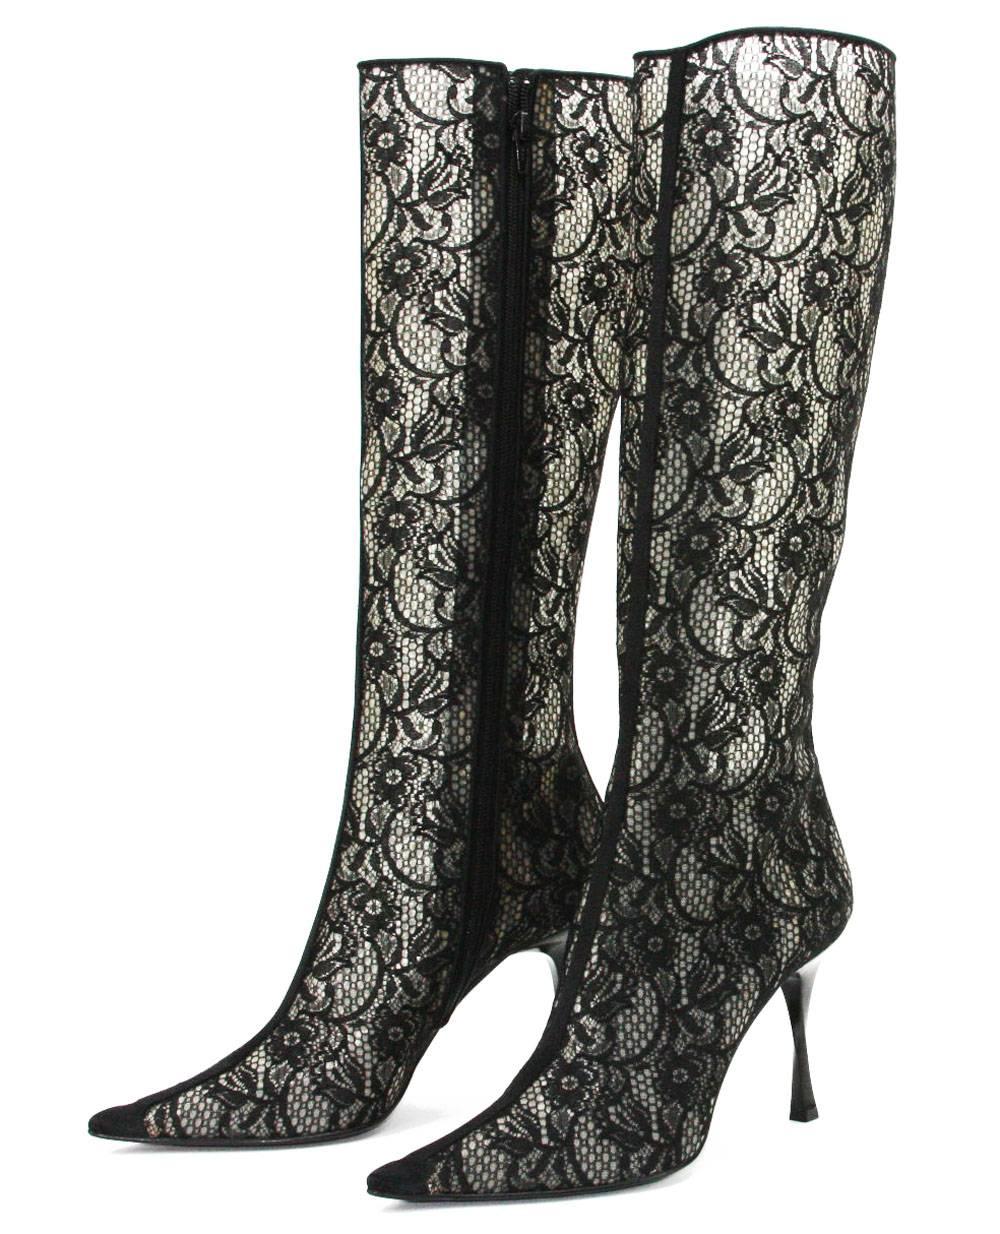 casadei lace boots